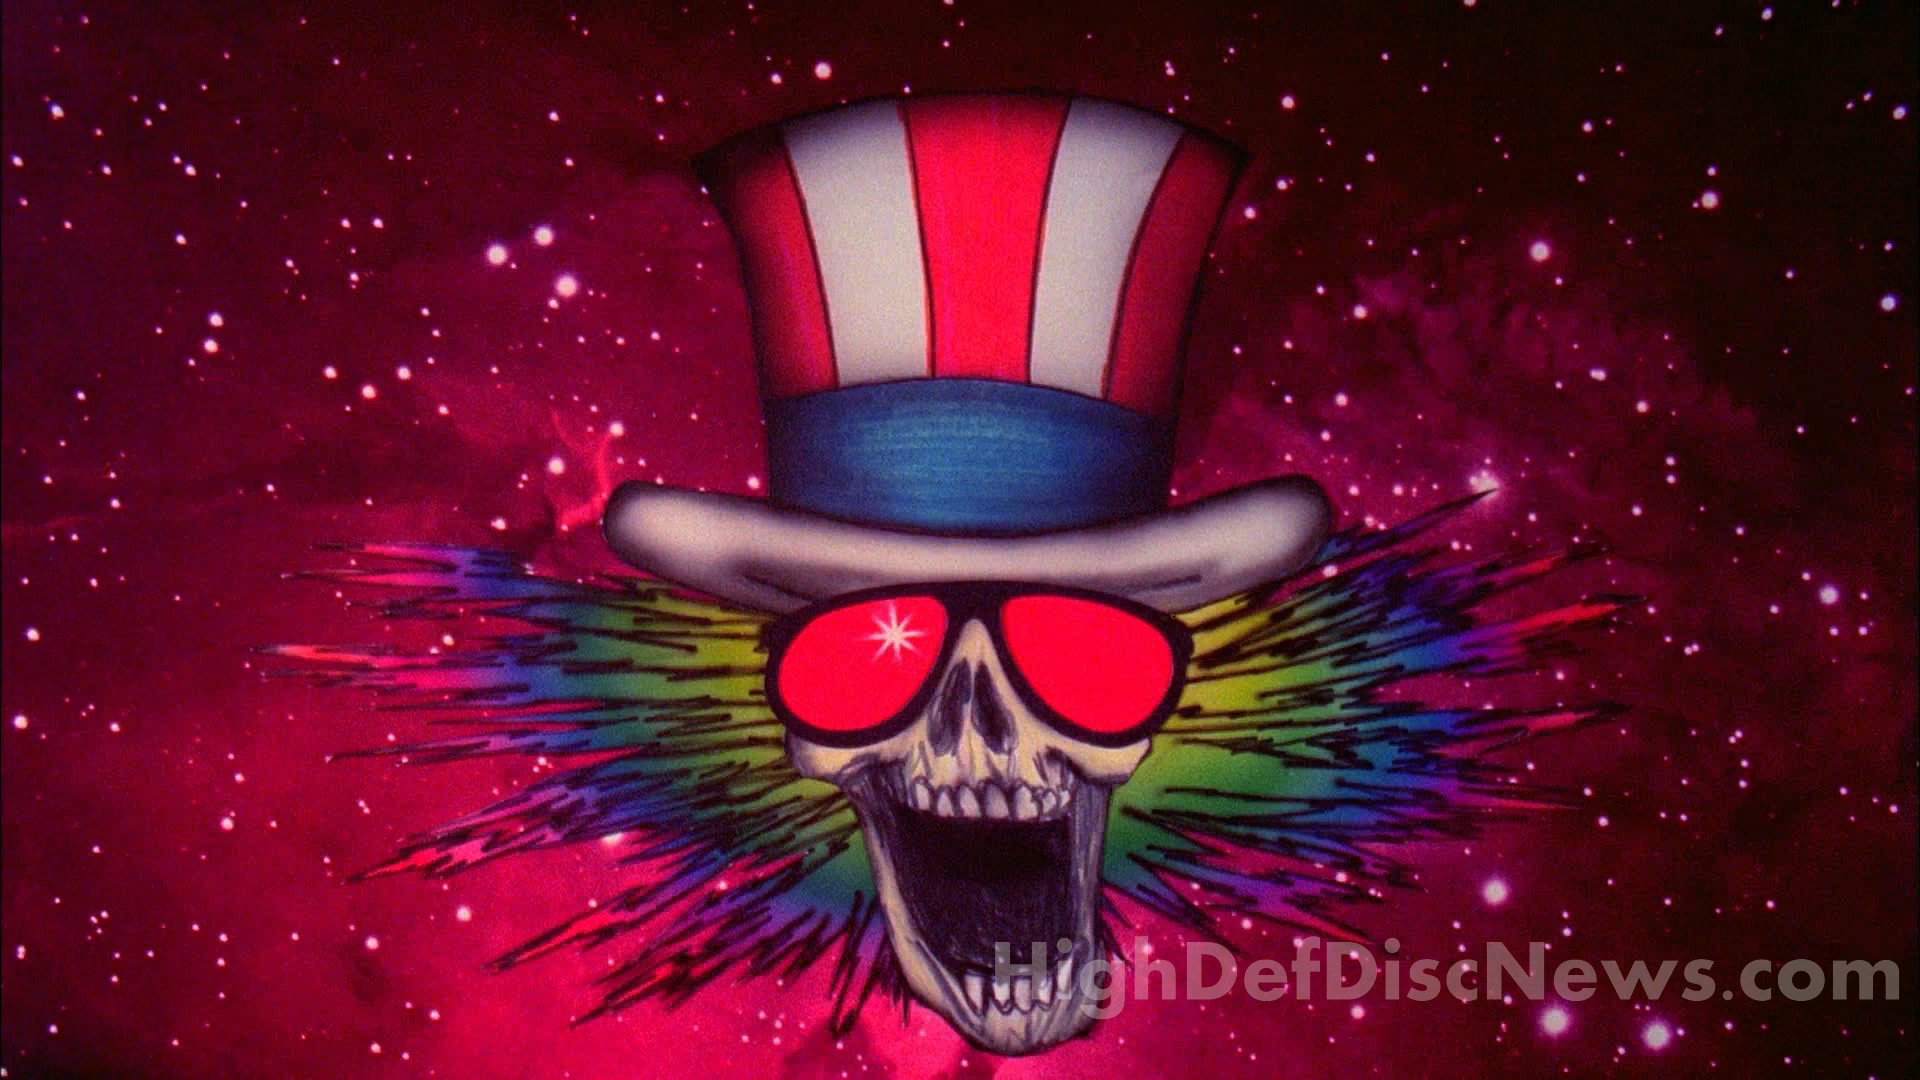 1920x1080 GRATEFUL DEAD WALLPAPERS FREE Wallpapers & Background images .